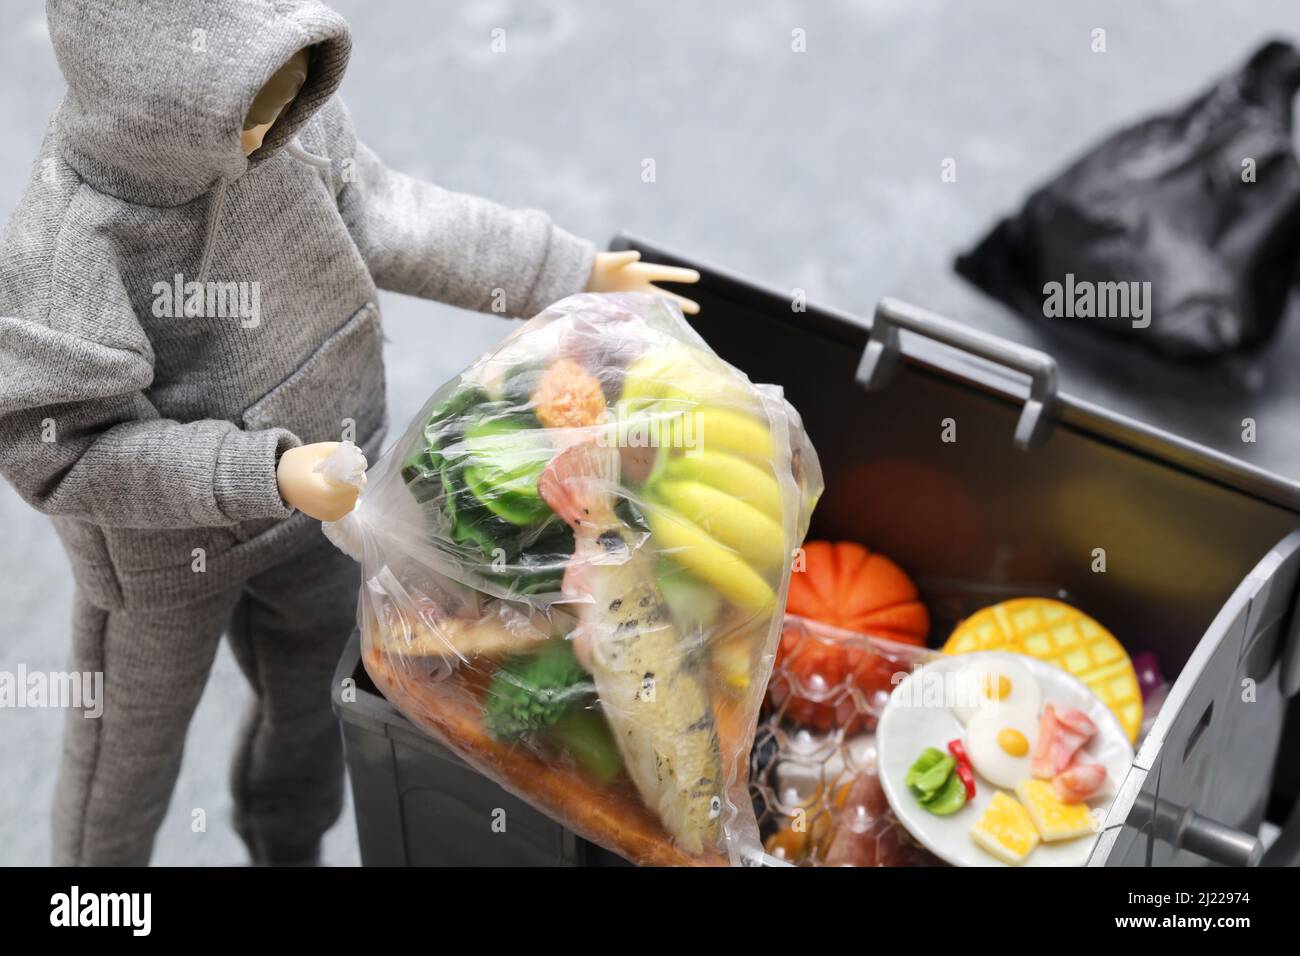 please don't waste food, world food day concept image made in miniature. Stock Photo